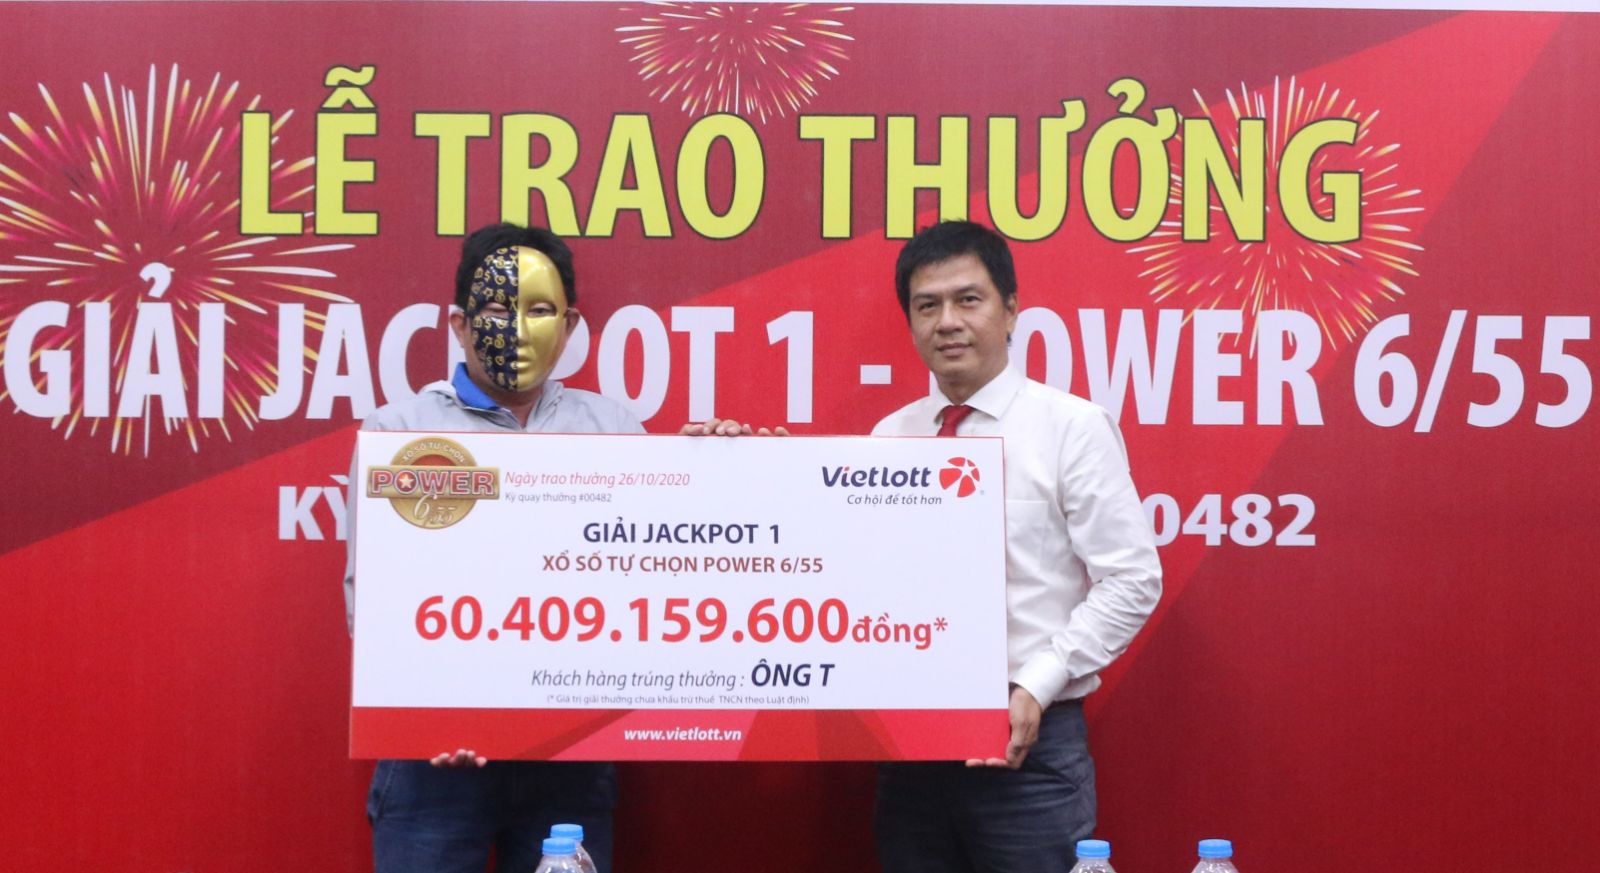 Vietlott lottery by electronic invoice number: New project, no date of application yet!  - Photo 1.